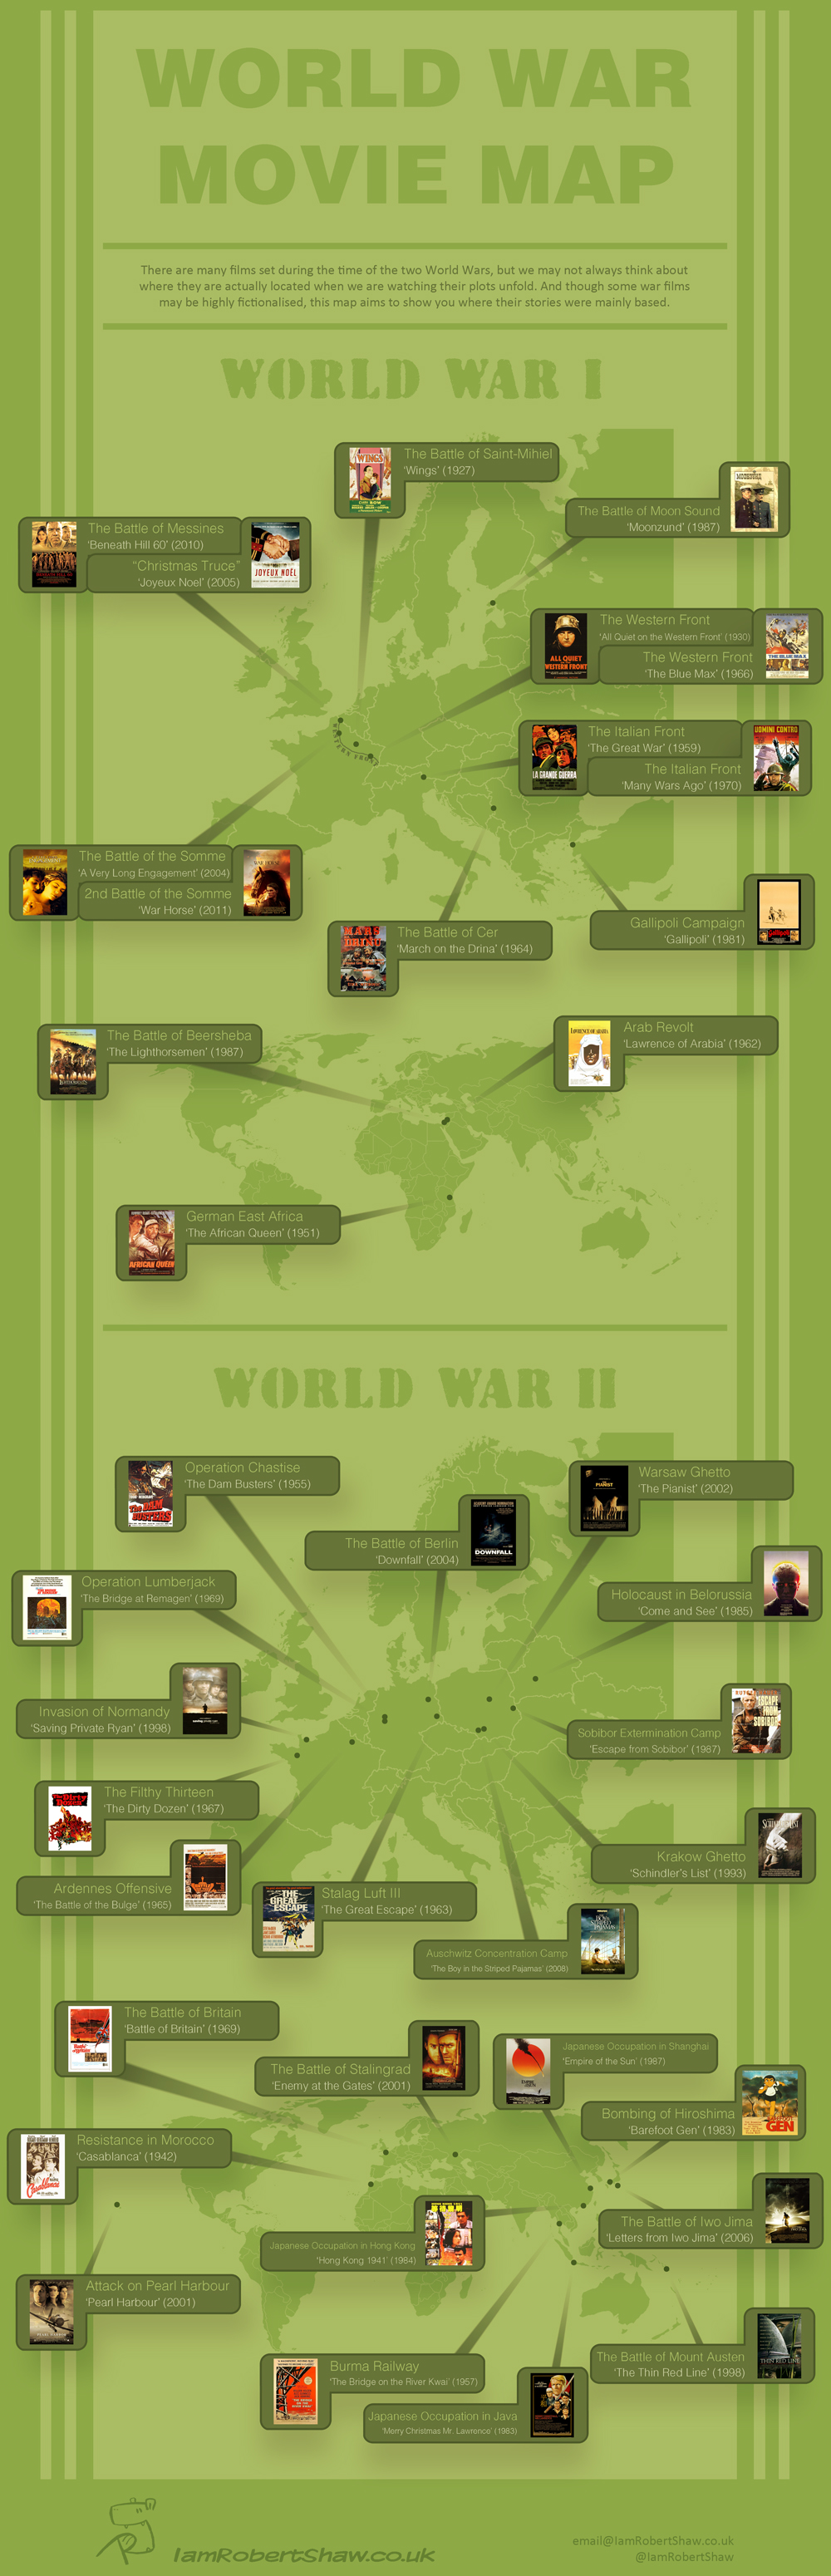 Two maps of the world illustrate the locations of various movie plots from the first and second world war.